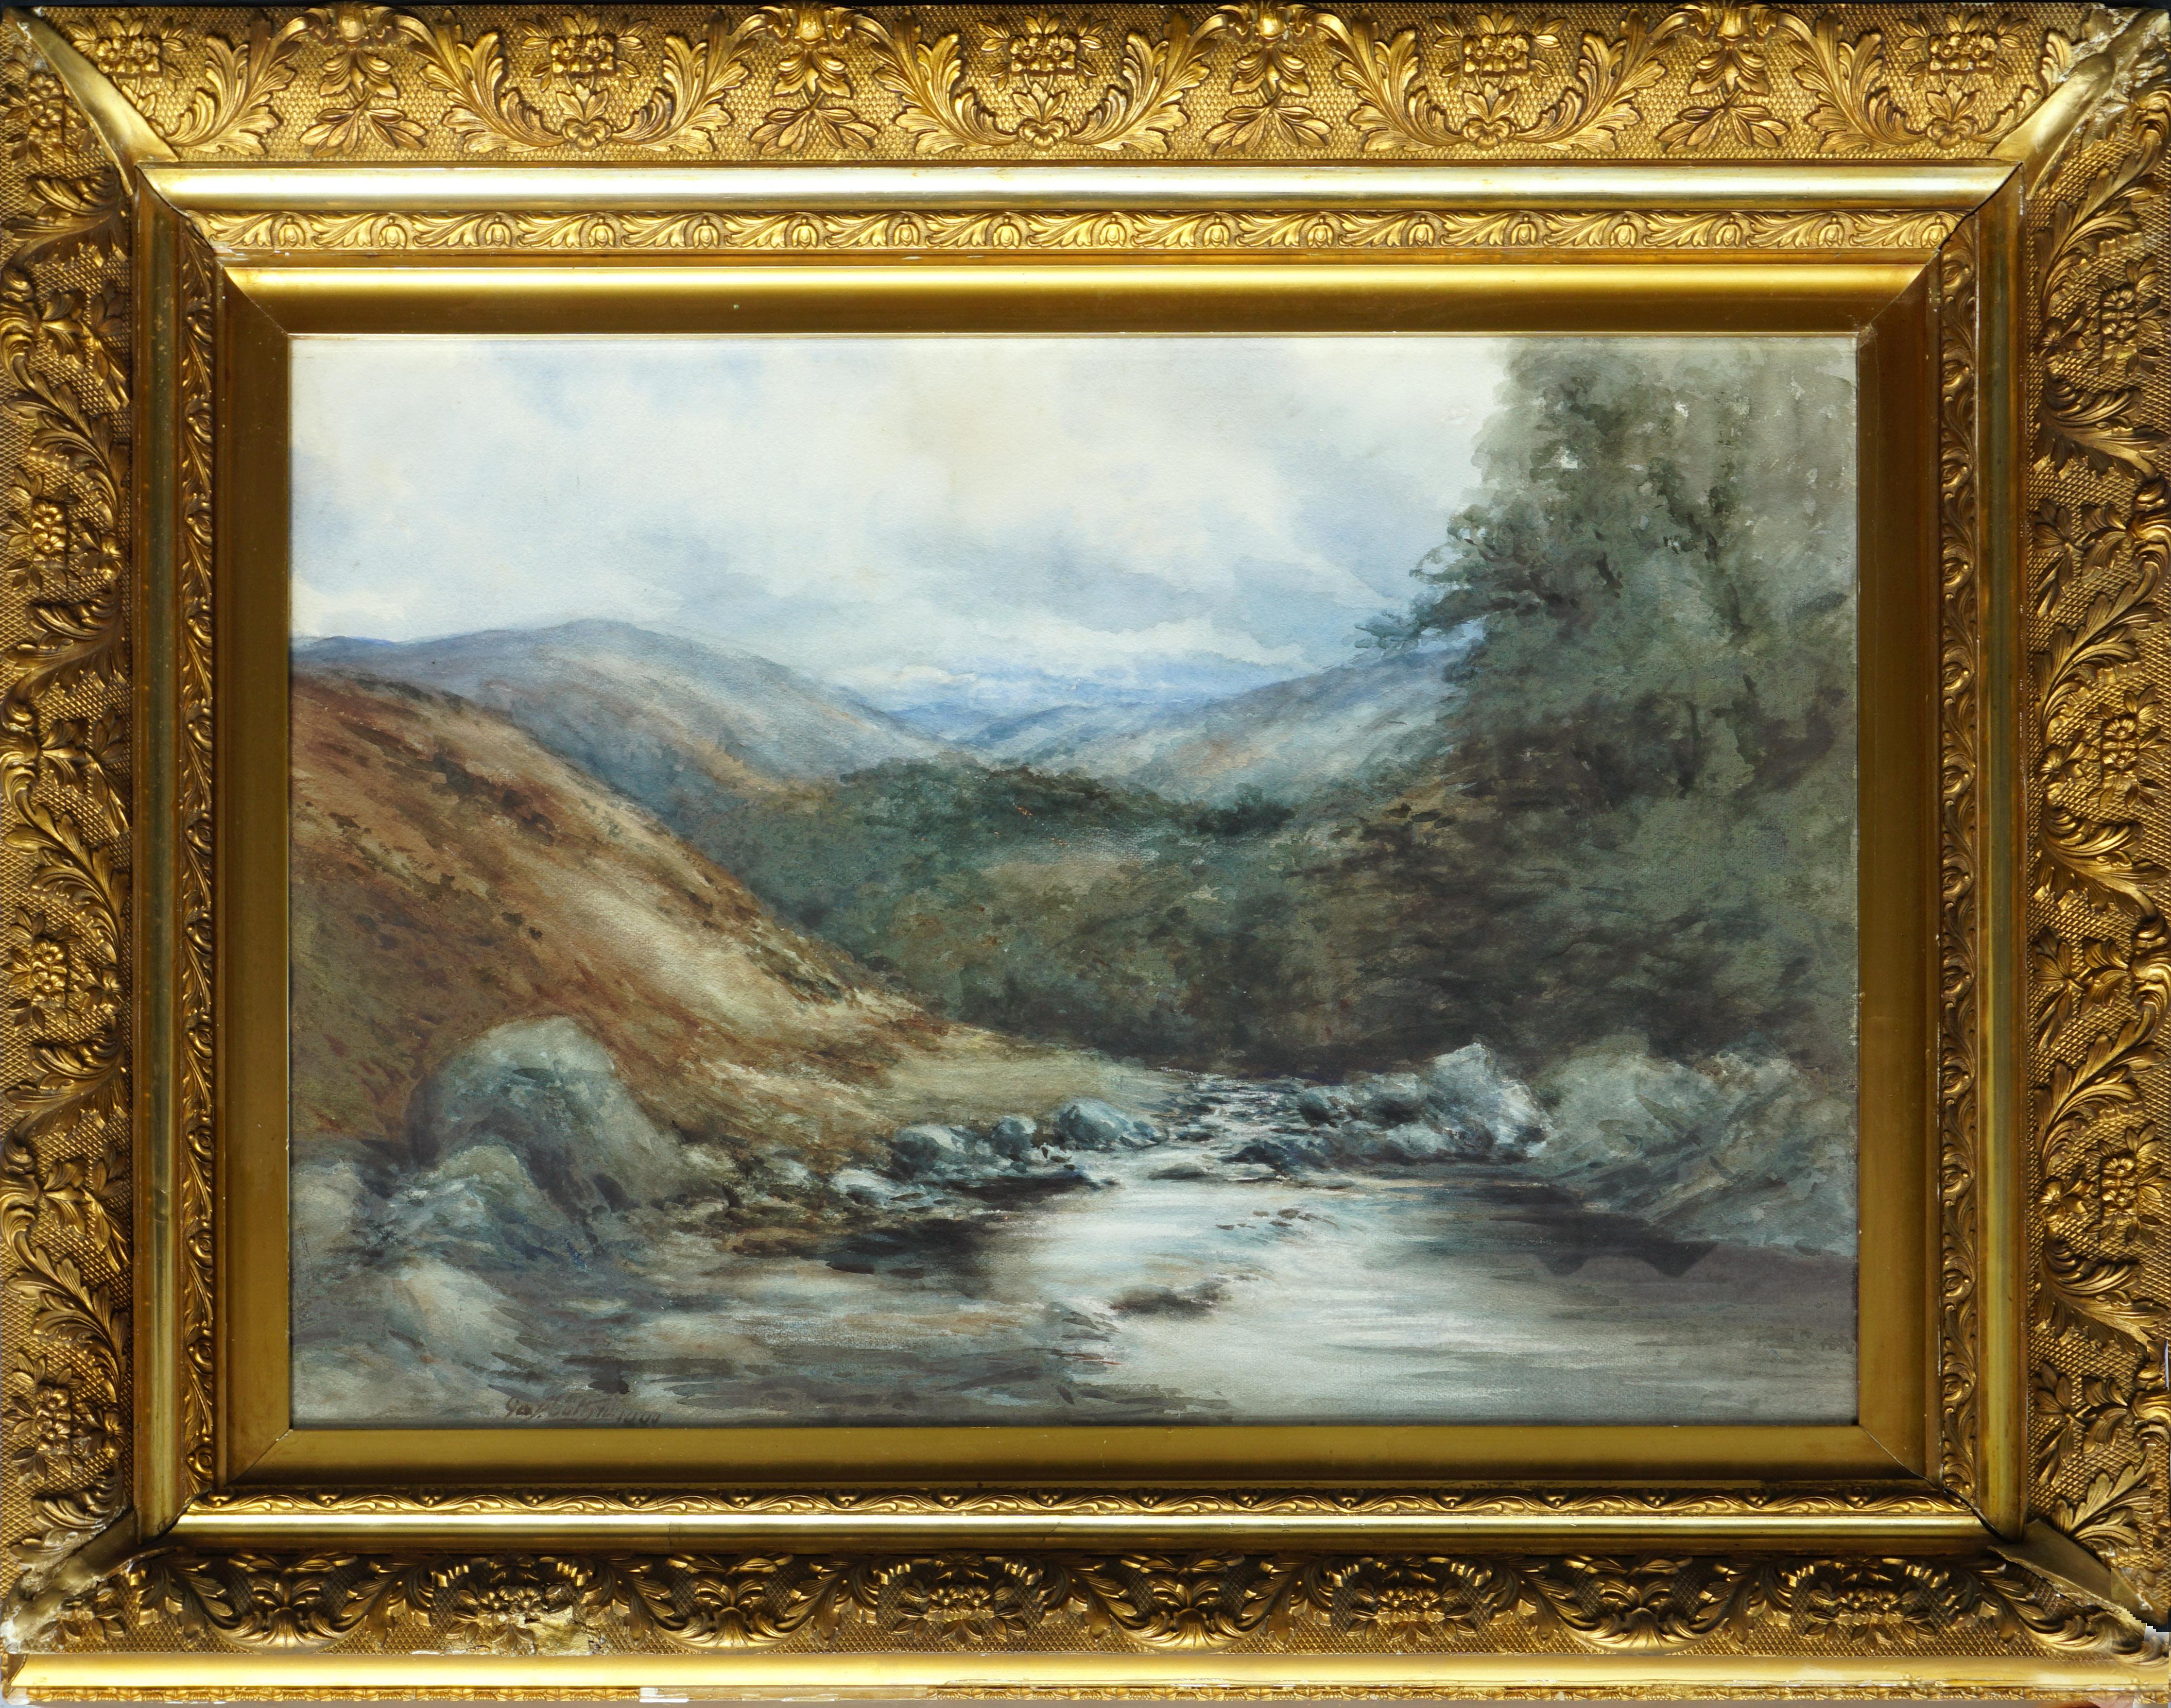 George S. Cathro Landscape Art - The River Dee, Balmoral, Scotland - Early 20th Century Landscape